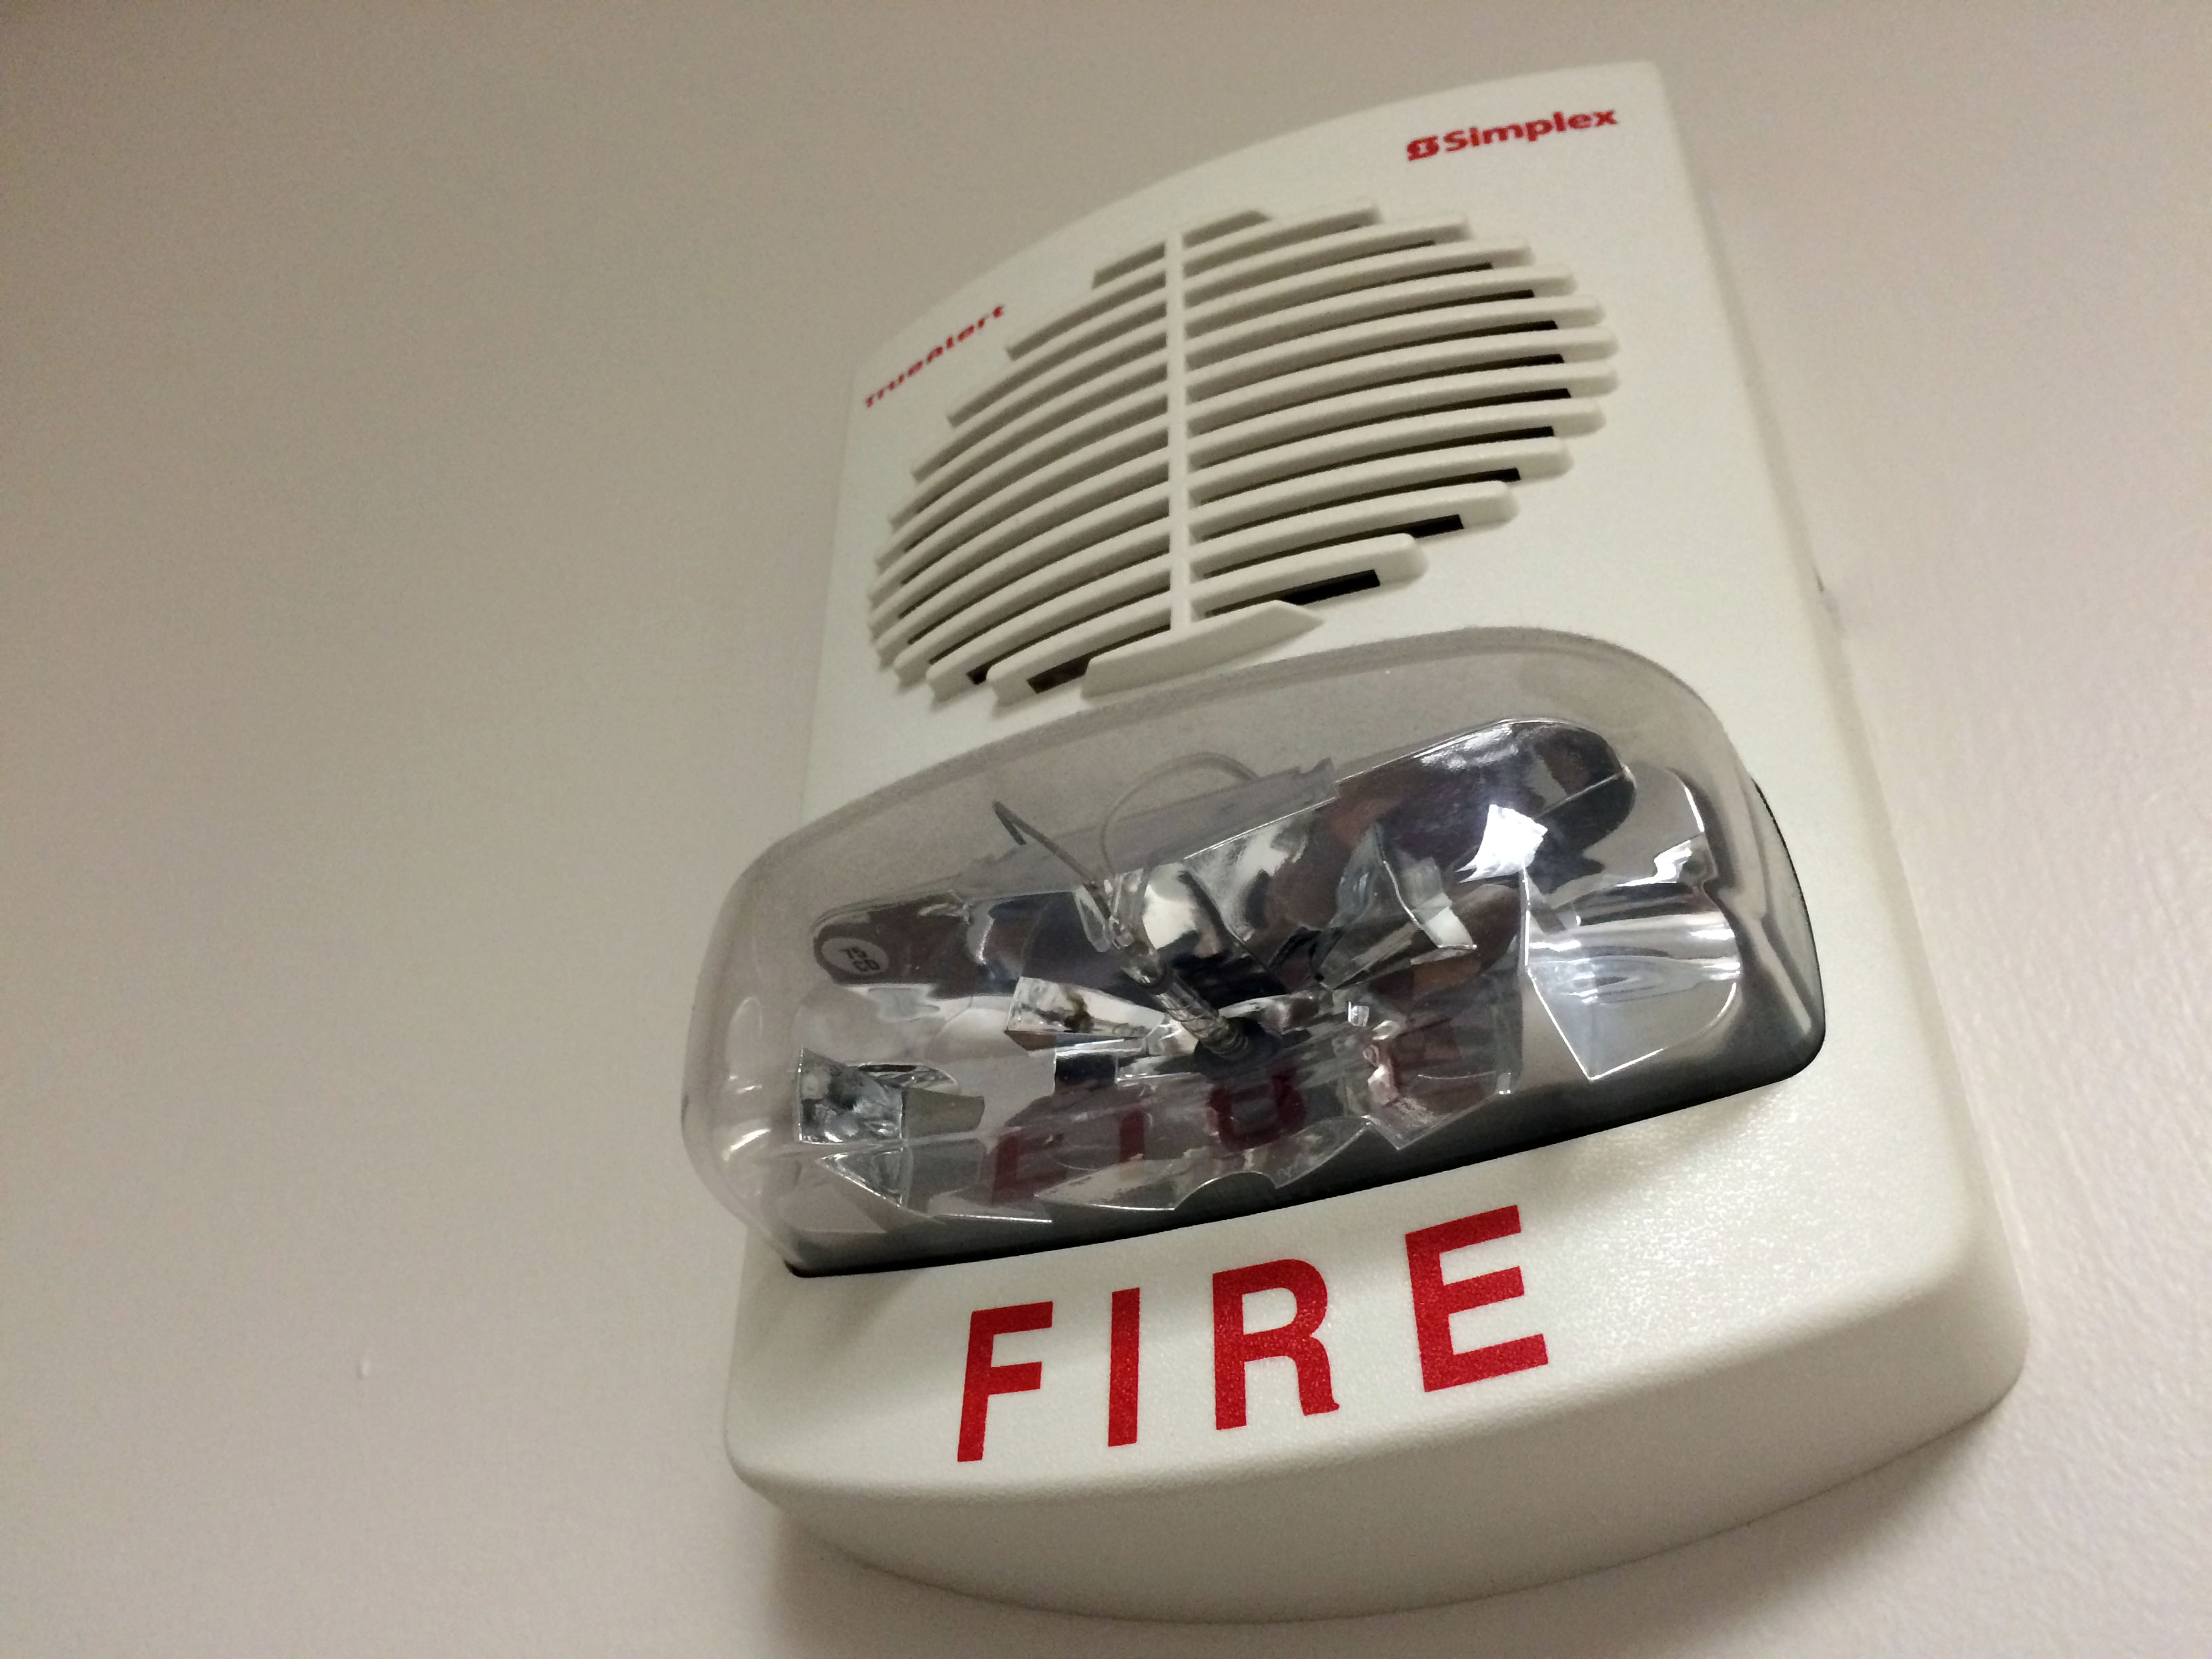 A fire alarm with strobe light